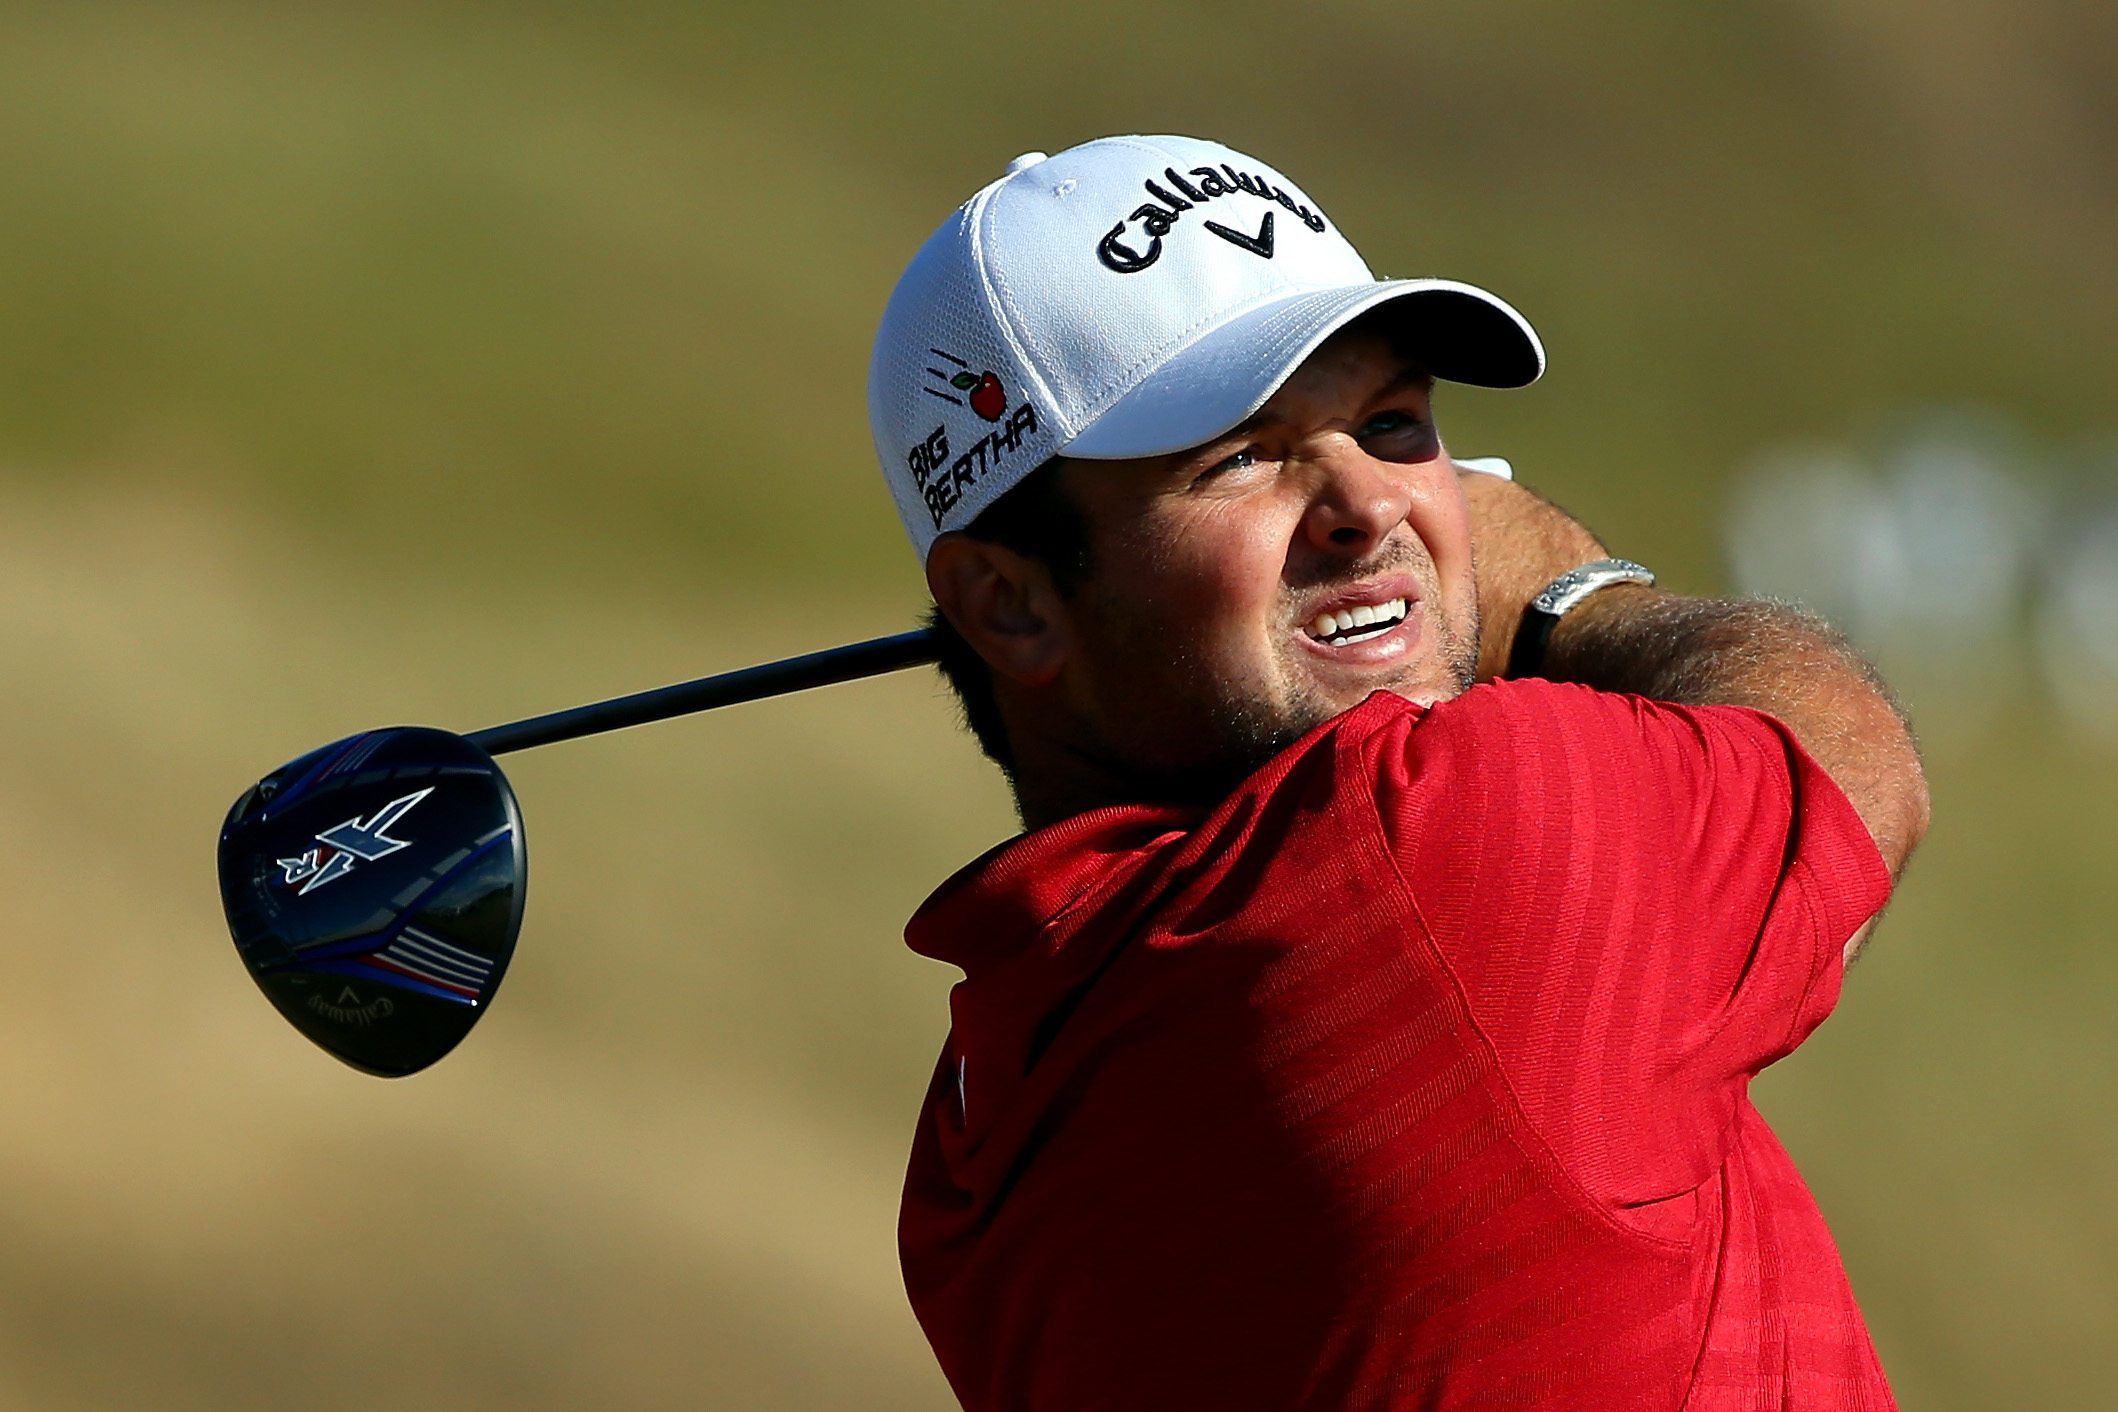 Patrick Reed squints into the sun as he swings.